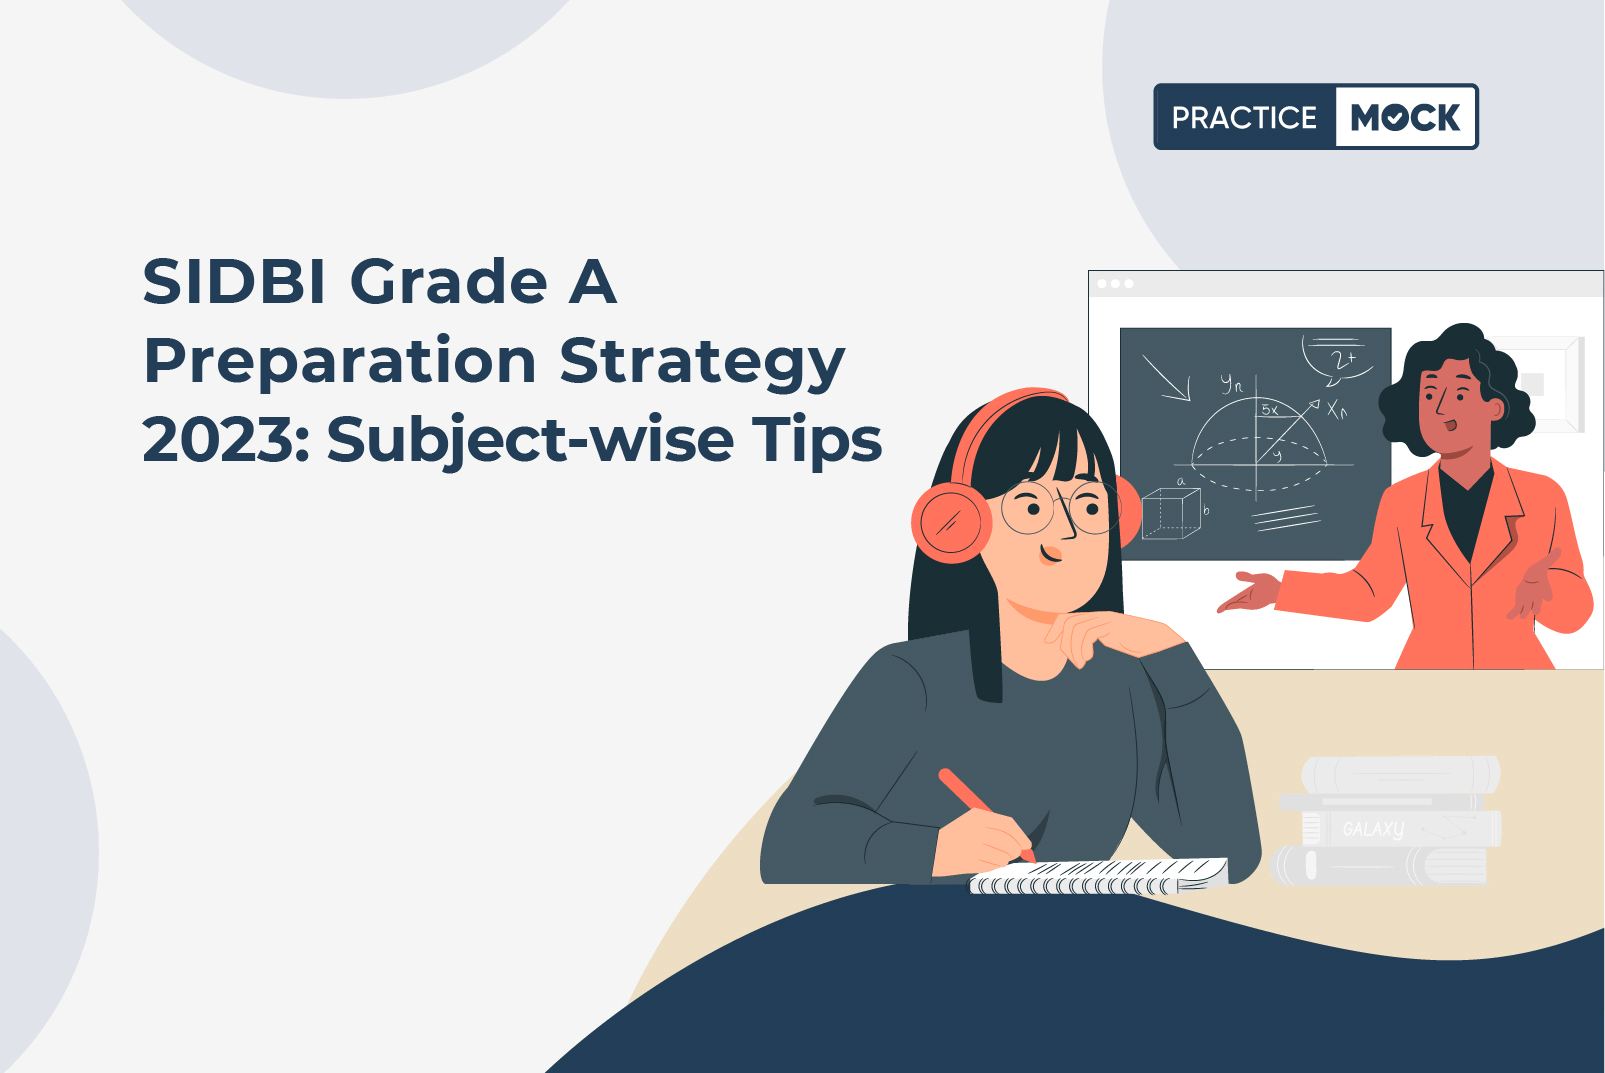 SIDBI Grade A Preparation Strategy 2023: Subject-wise Tips